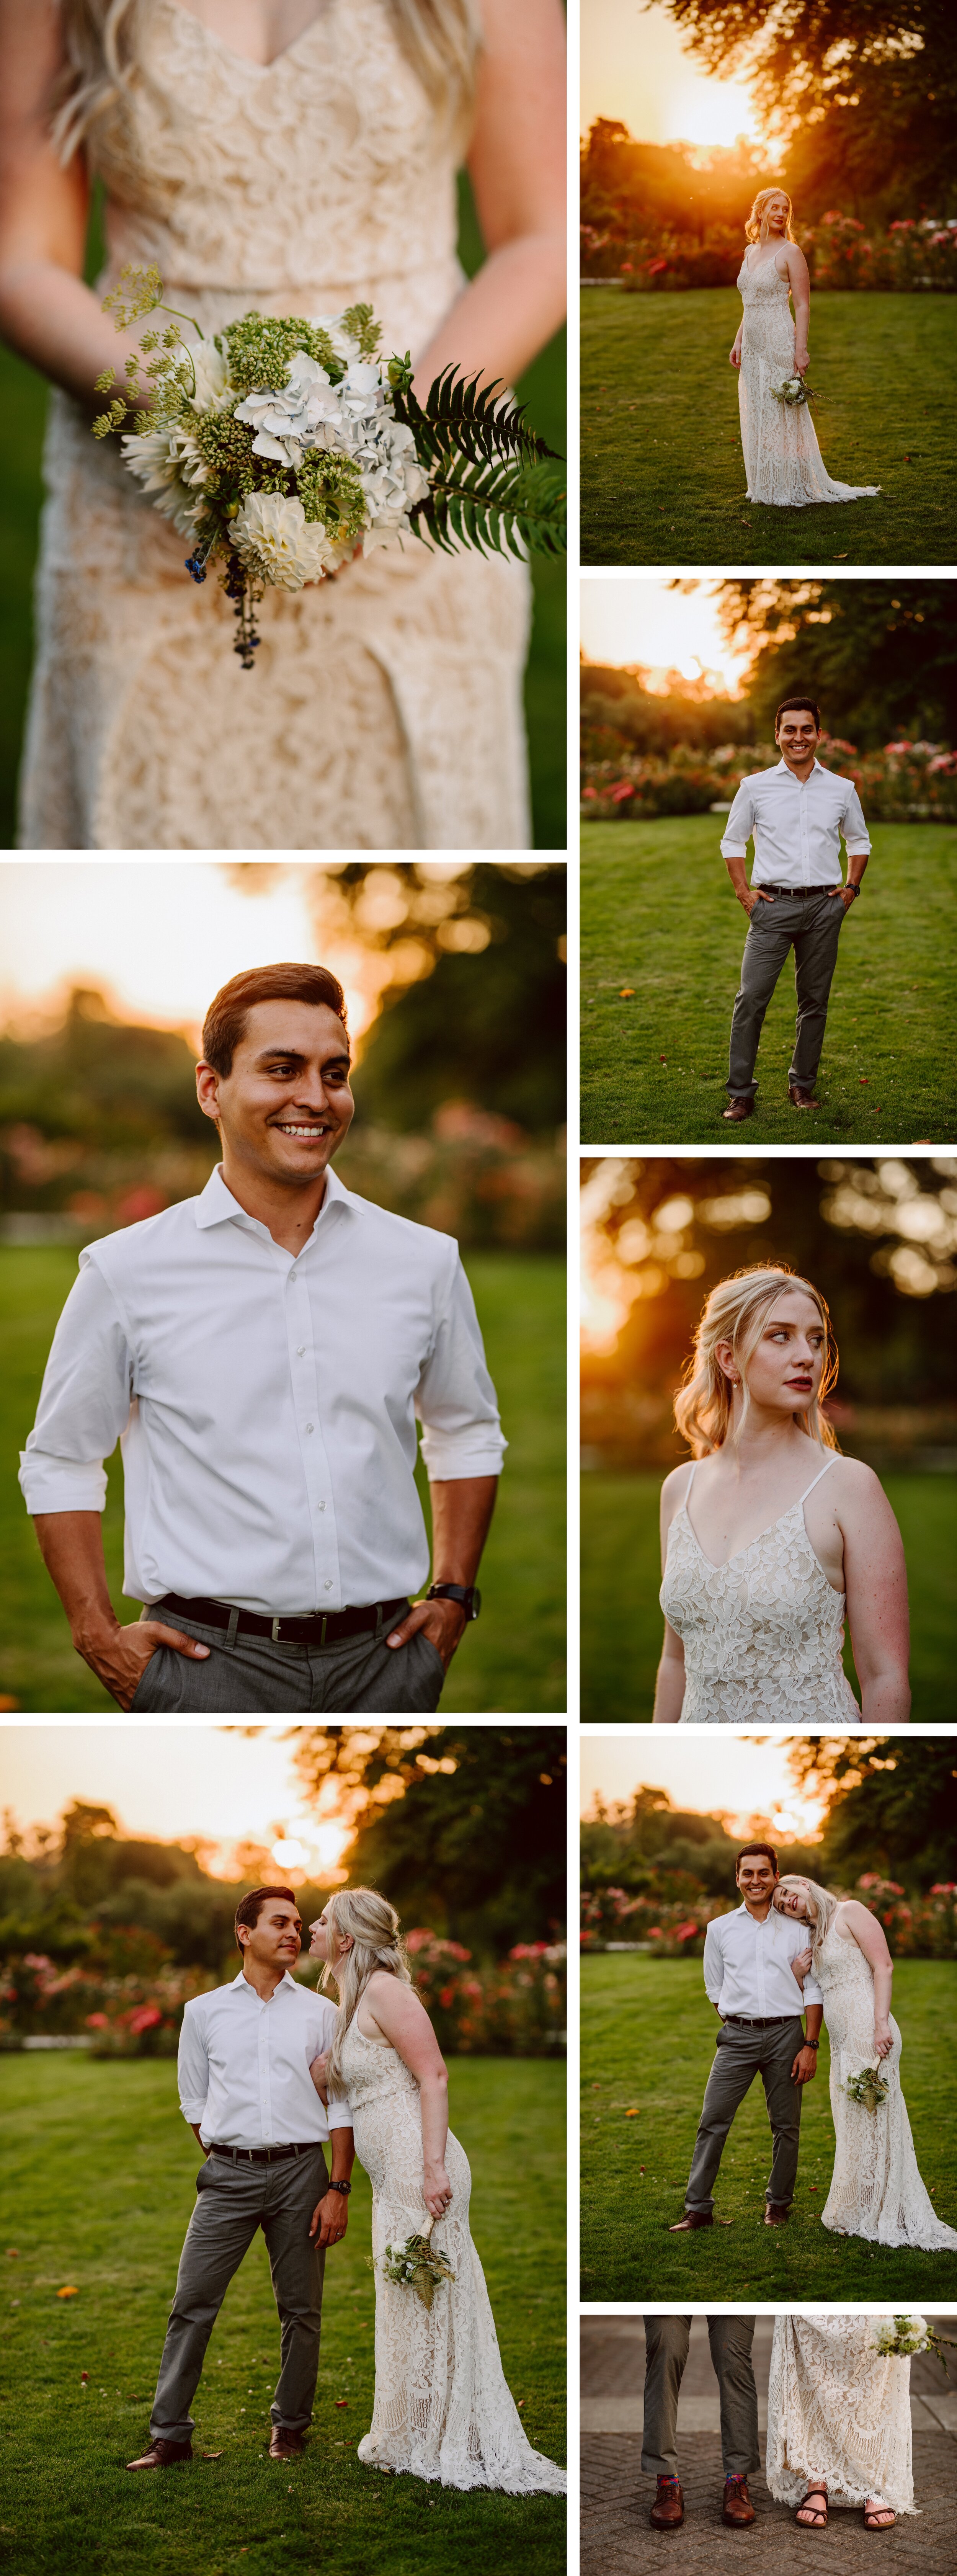 Bride and groom sunset portraits after their garden elopement